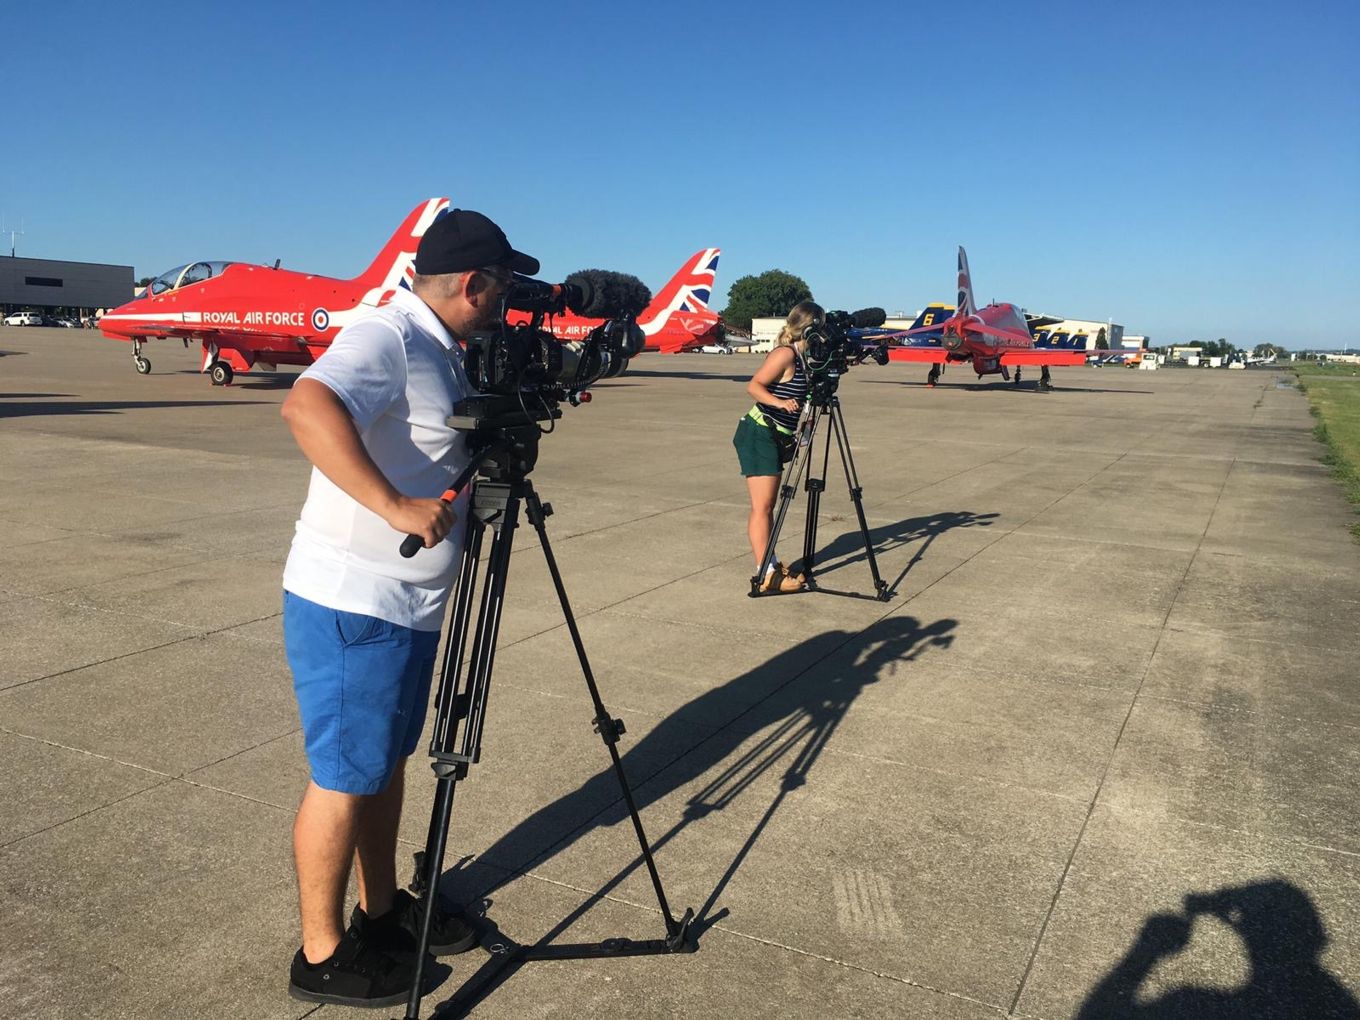 The documentary-makers on location with the Red Arrows.